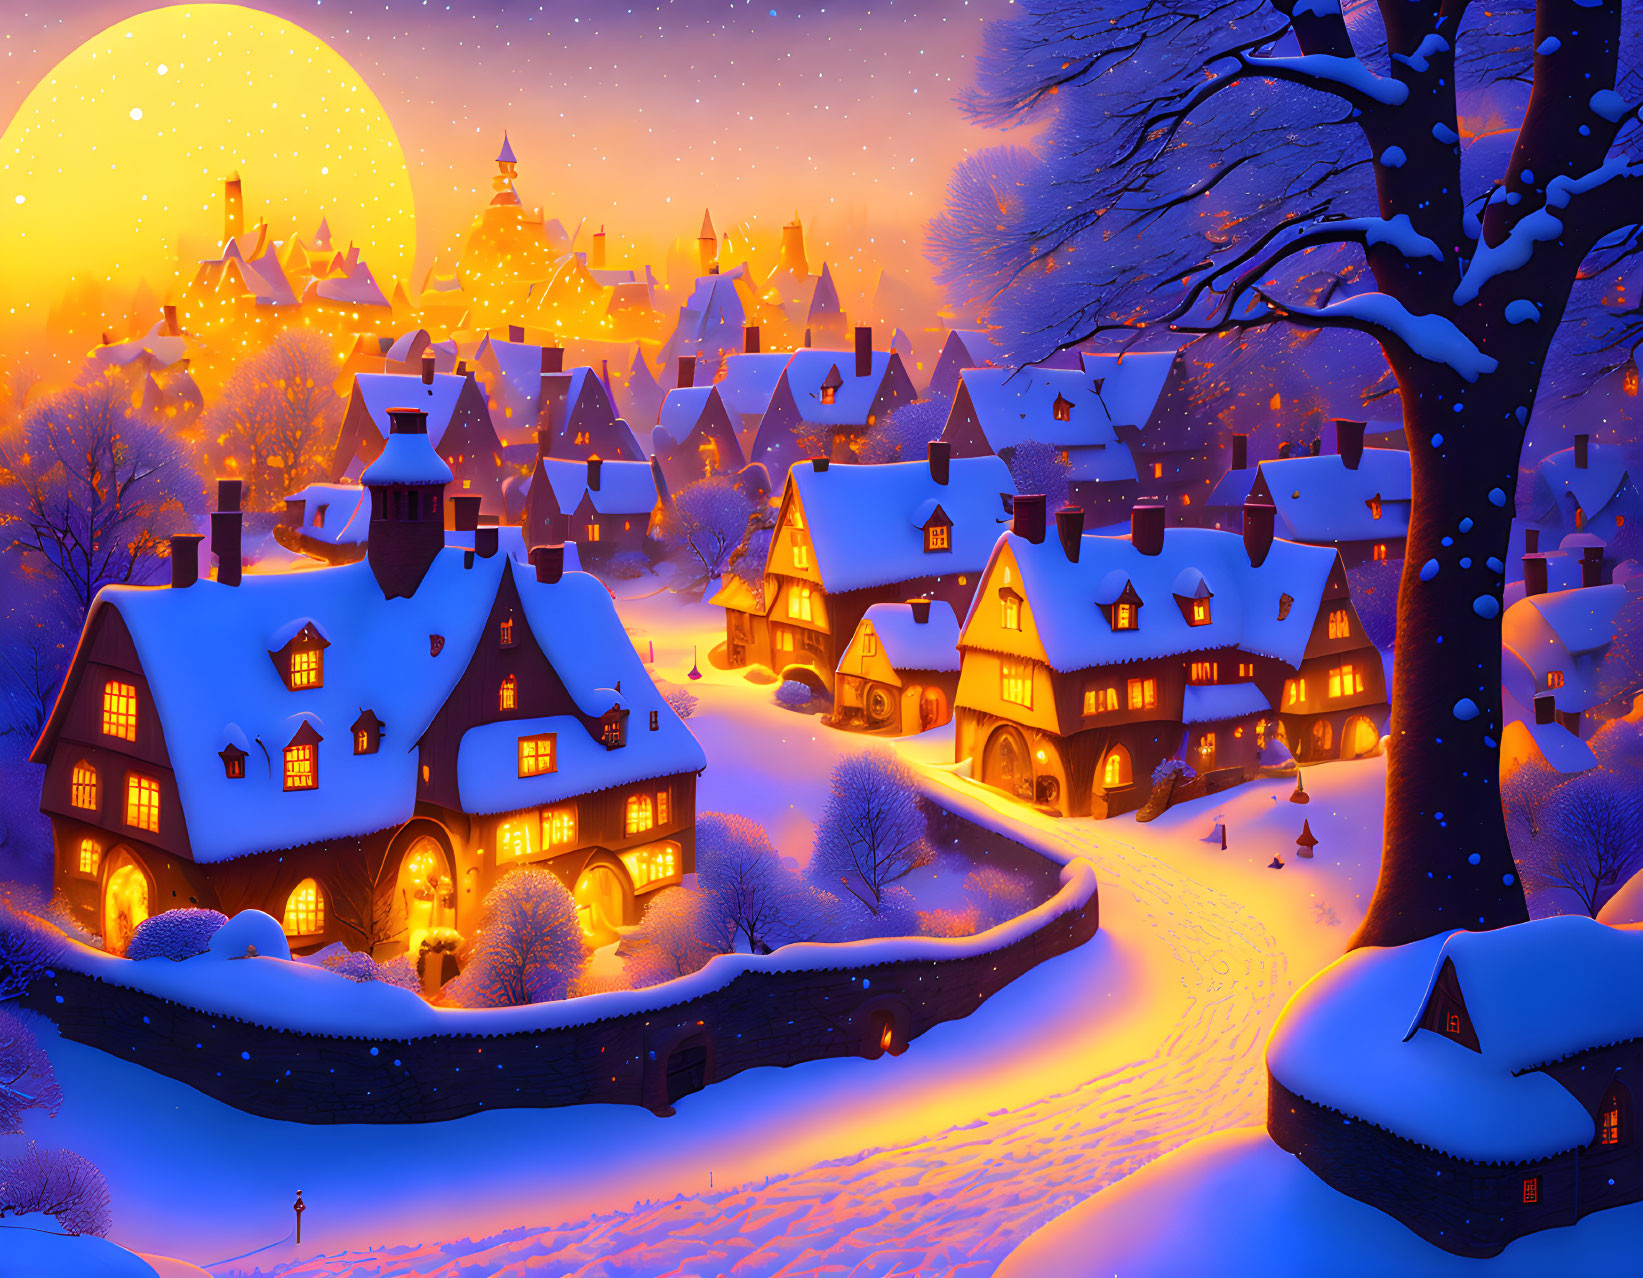 Snow-covered village with warmly lit homes under twilight sky